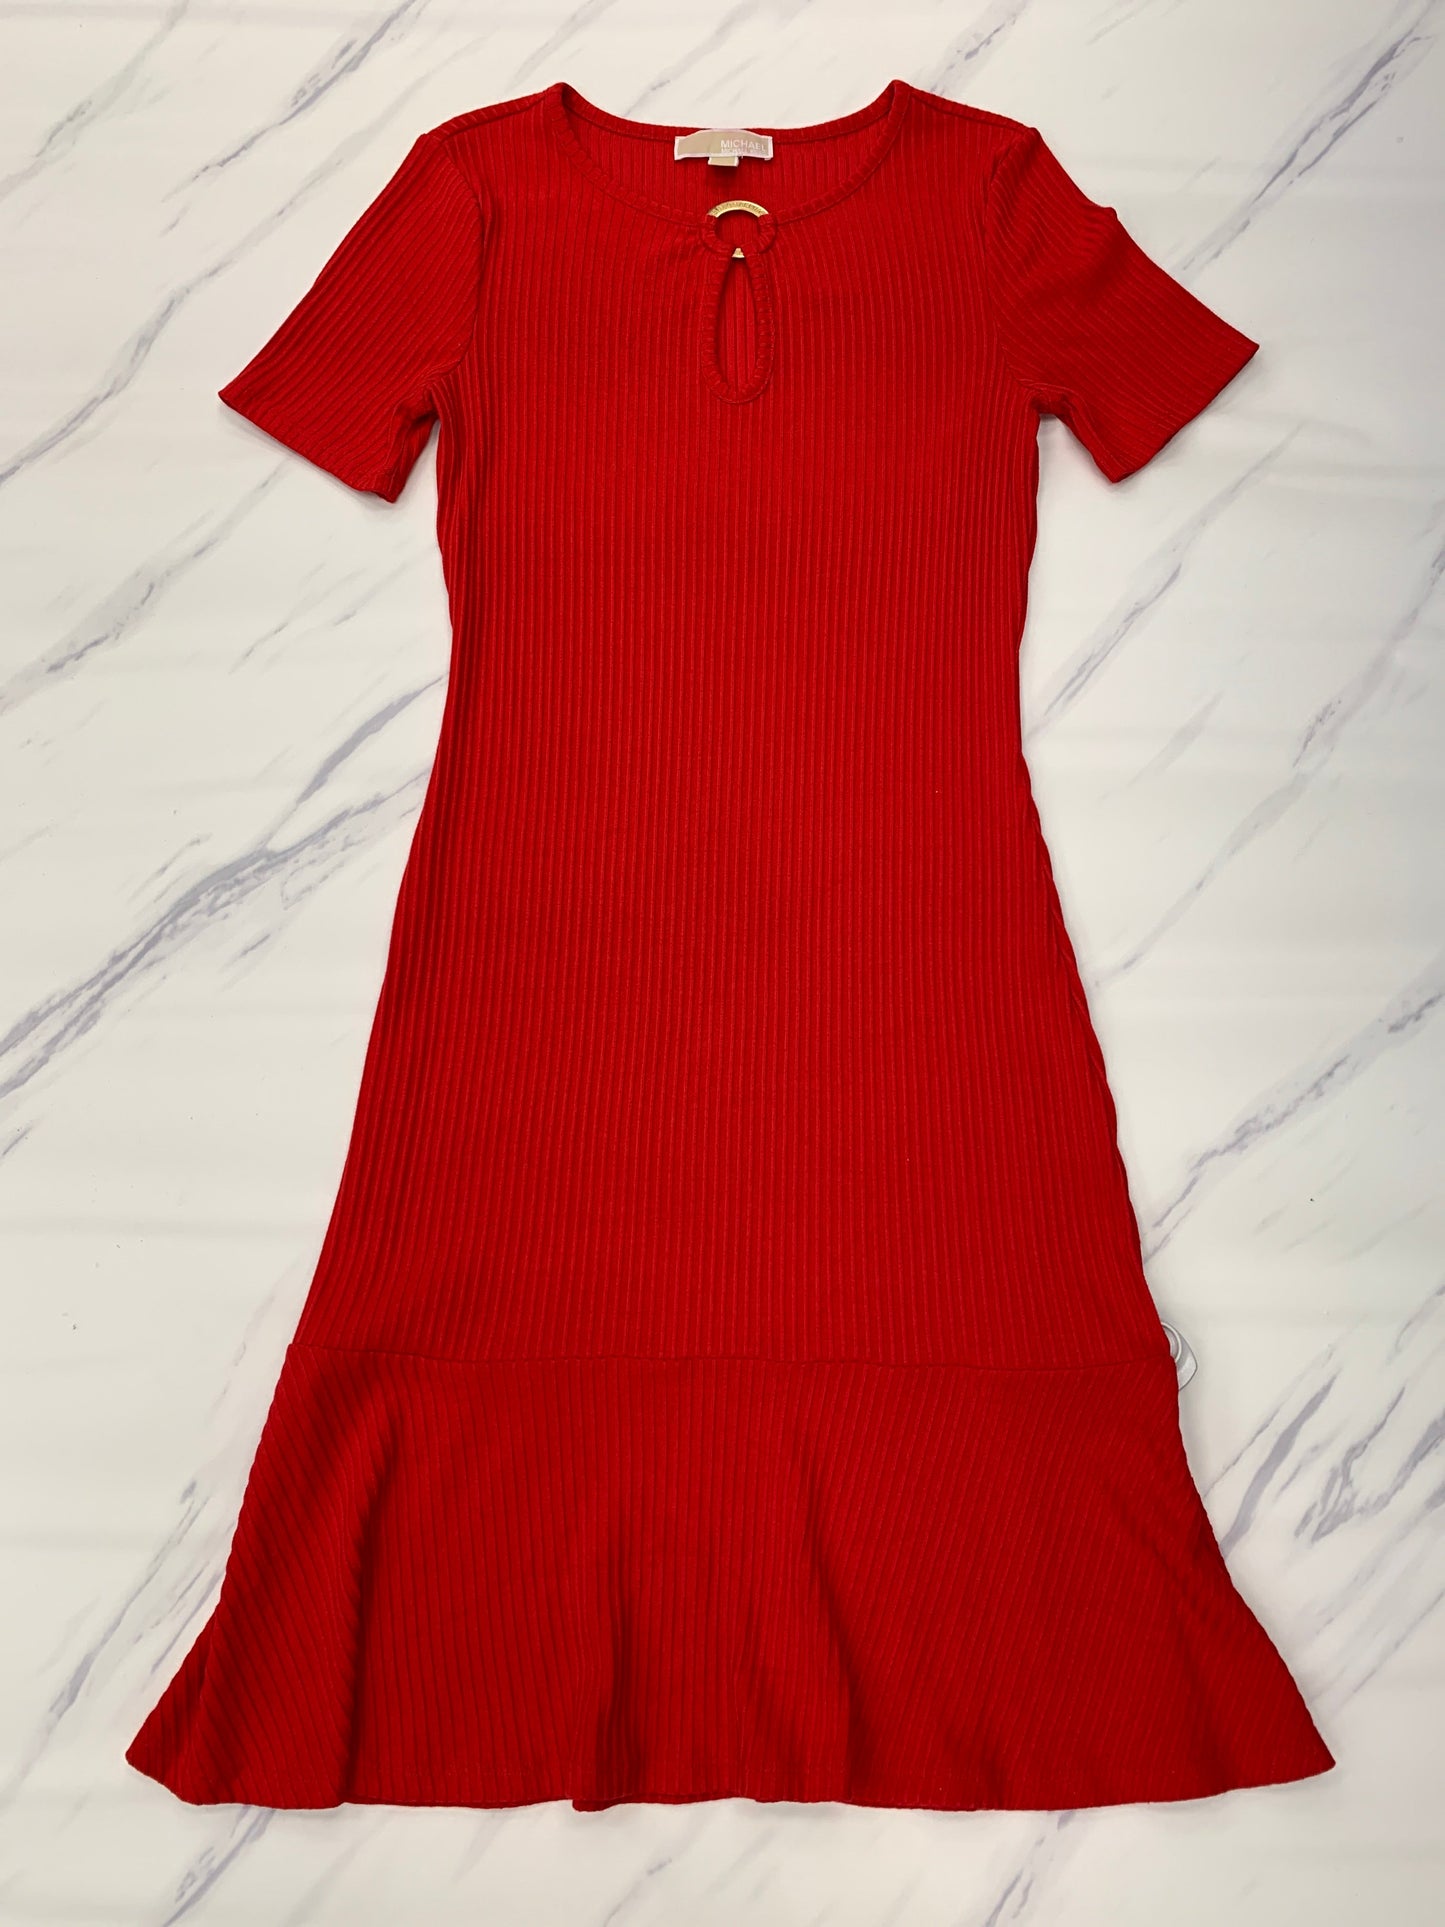 Red Dress Casual Midi Michael By Michael Kors, Size M